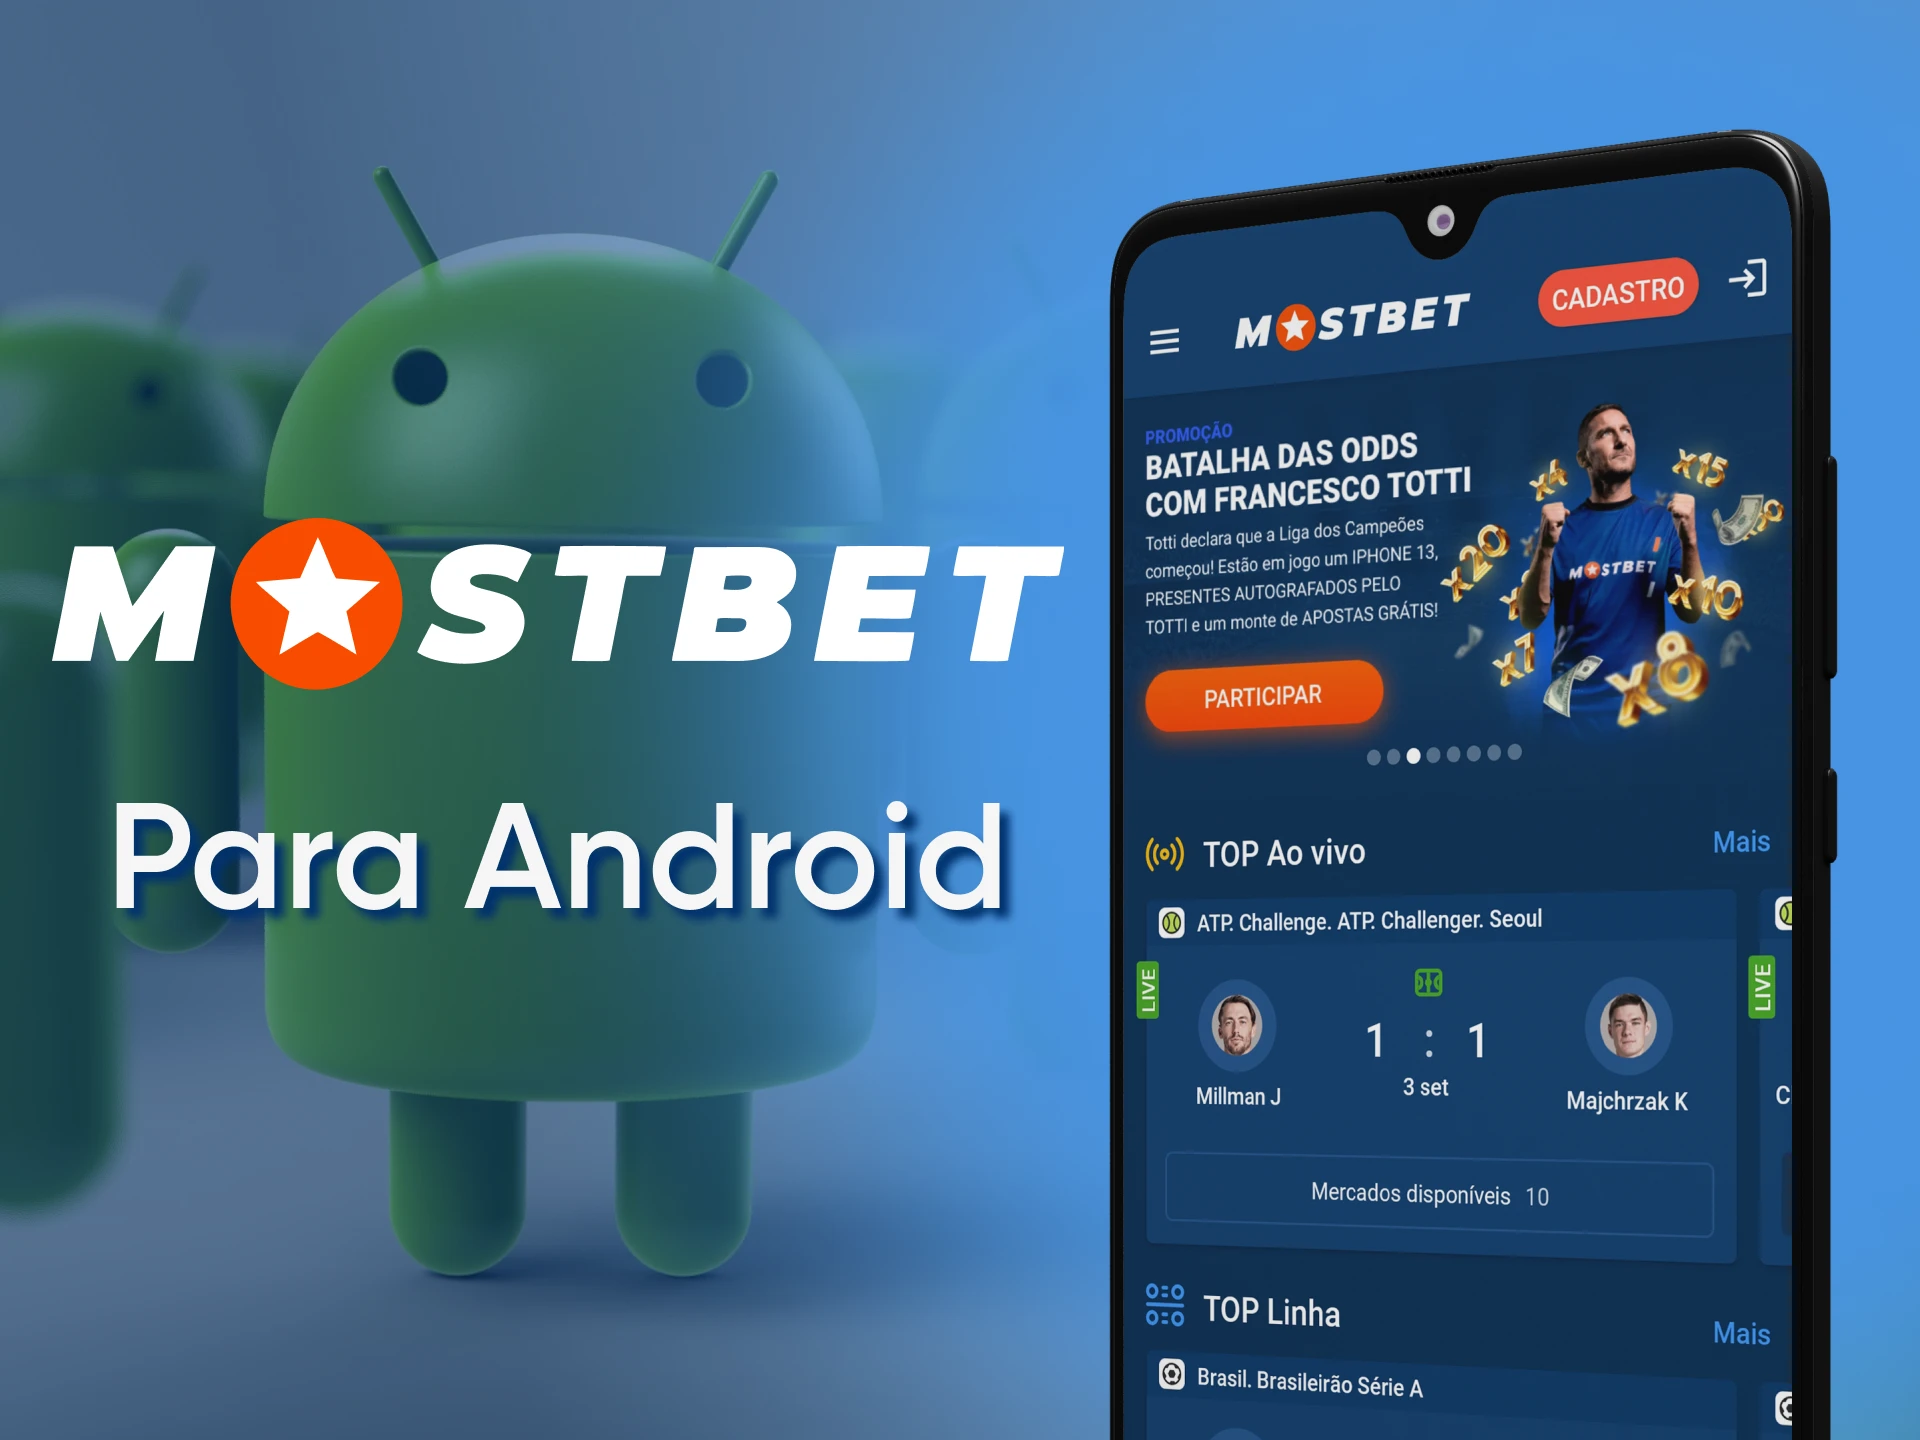 17 Tricks About Mostbet-27 bookmaker and casino in Azerbaijan You Wish You Knew Before